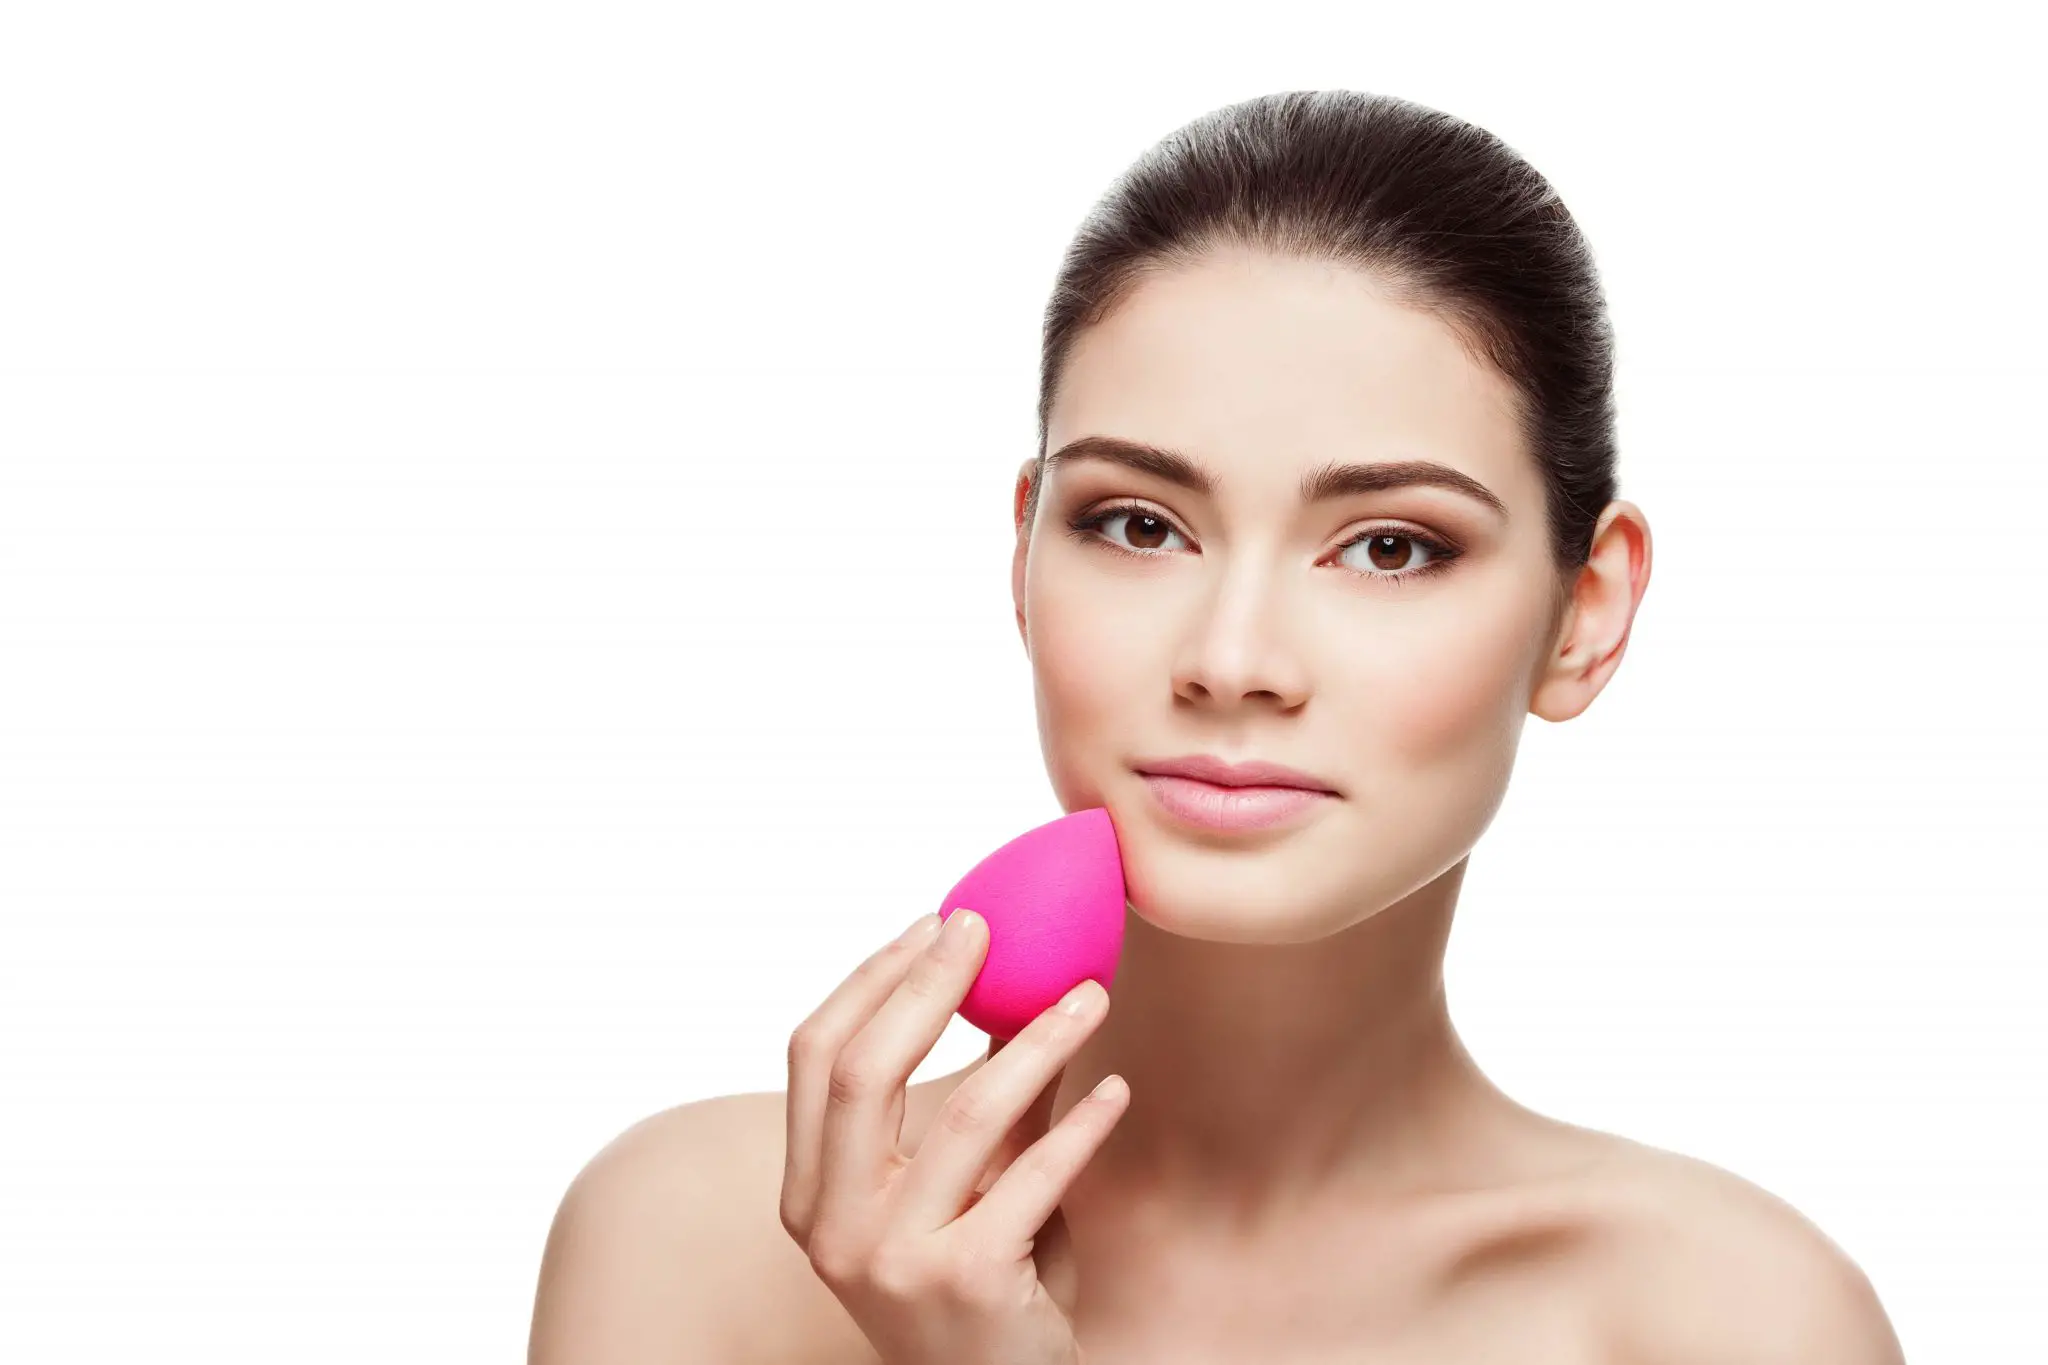 Why is there mold on beauty blender? How to get rid of it?